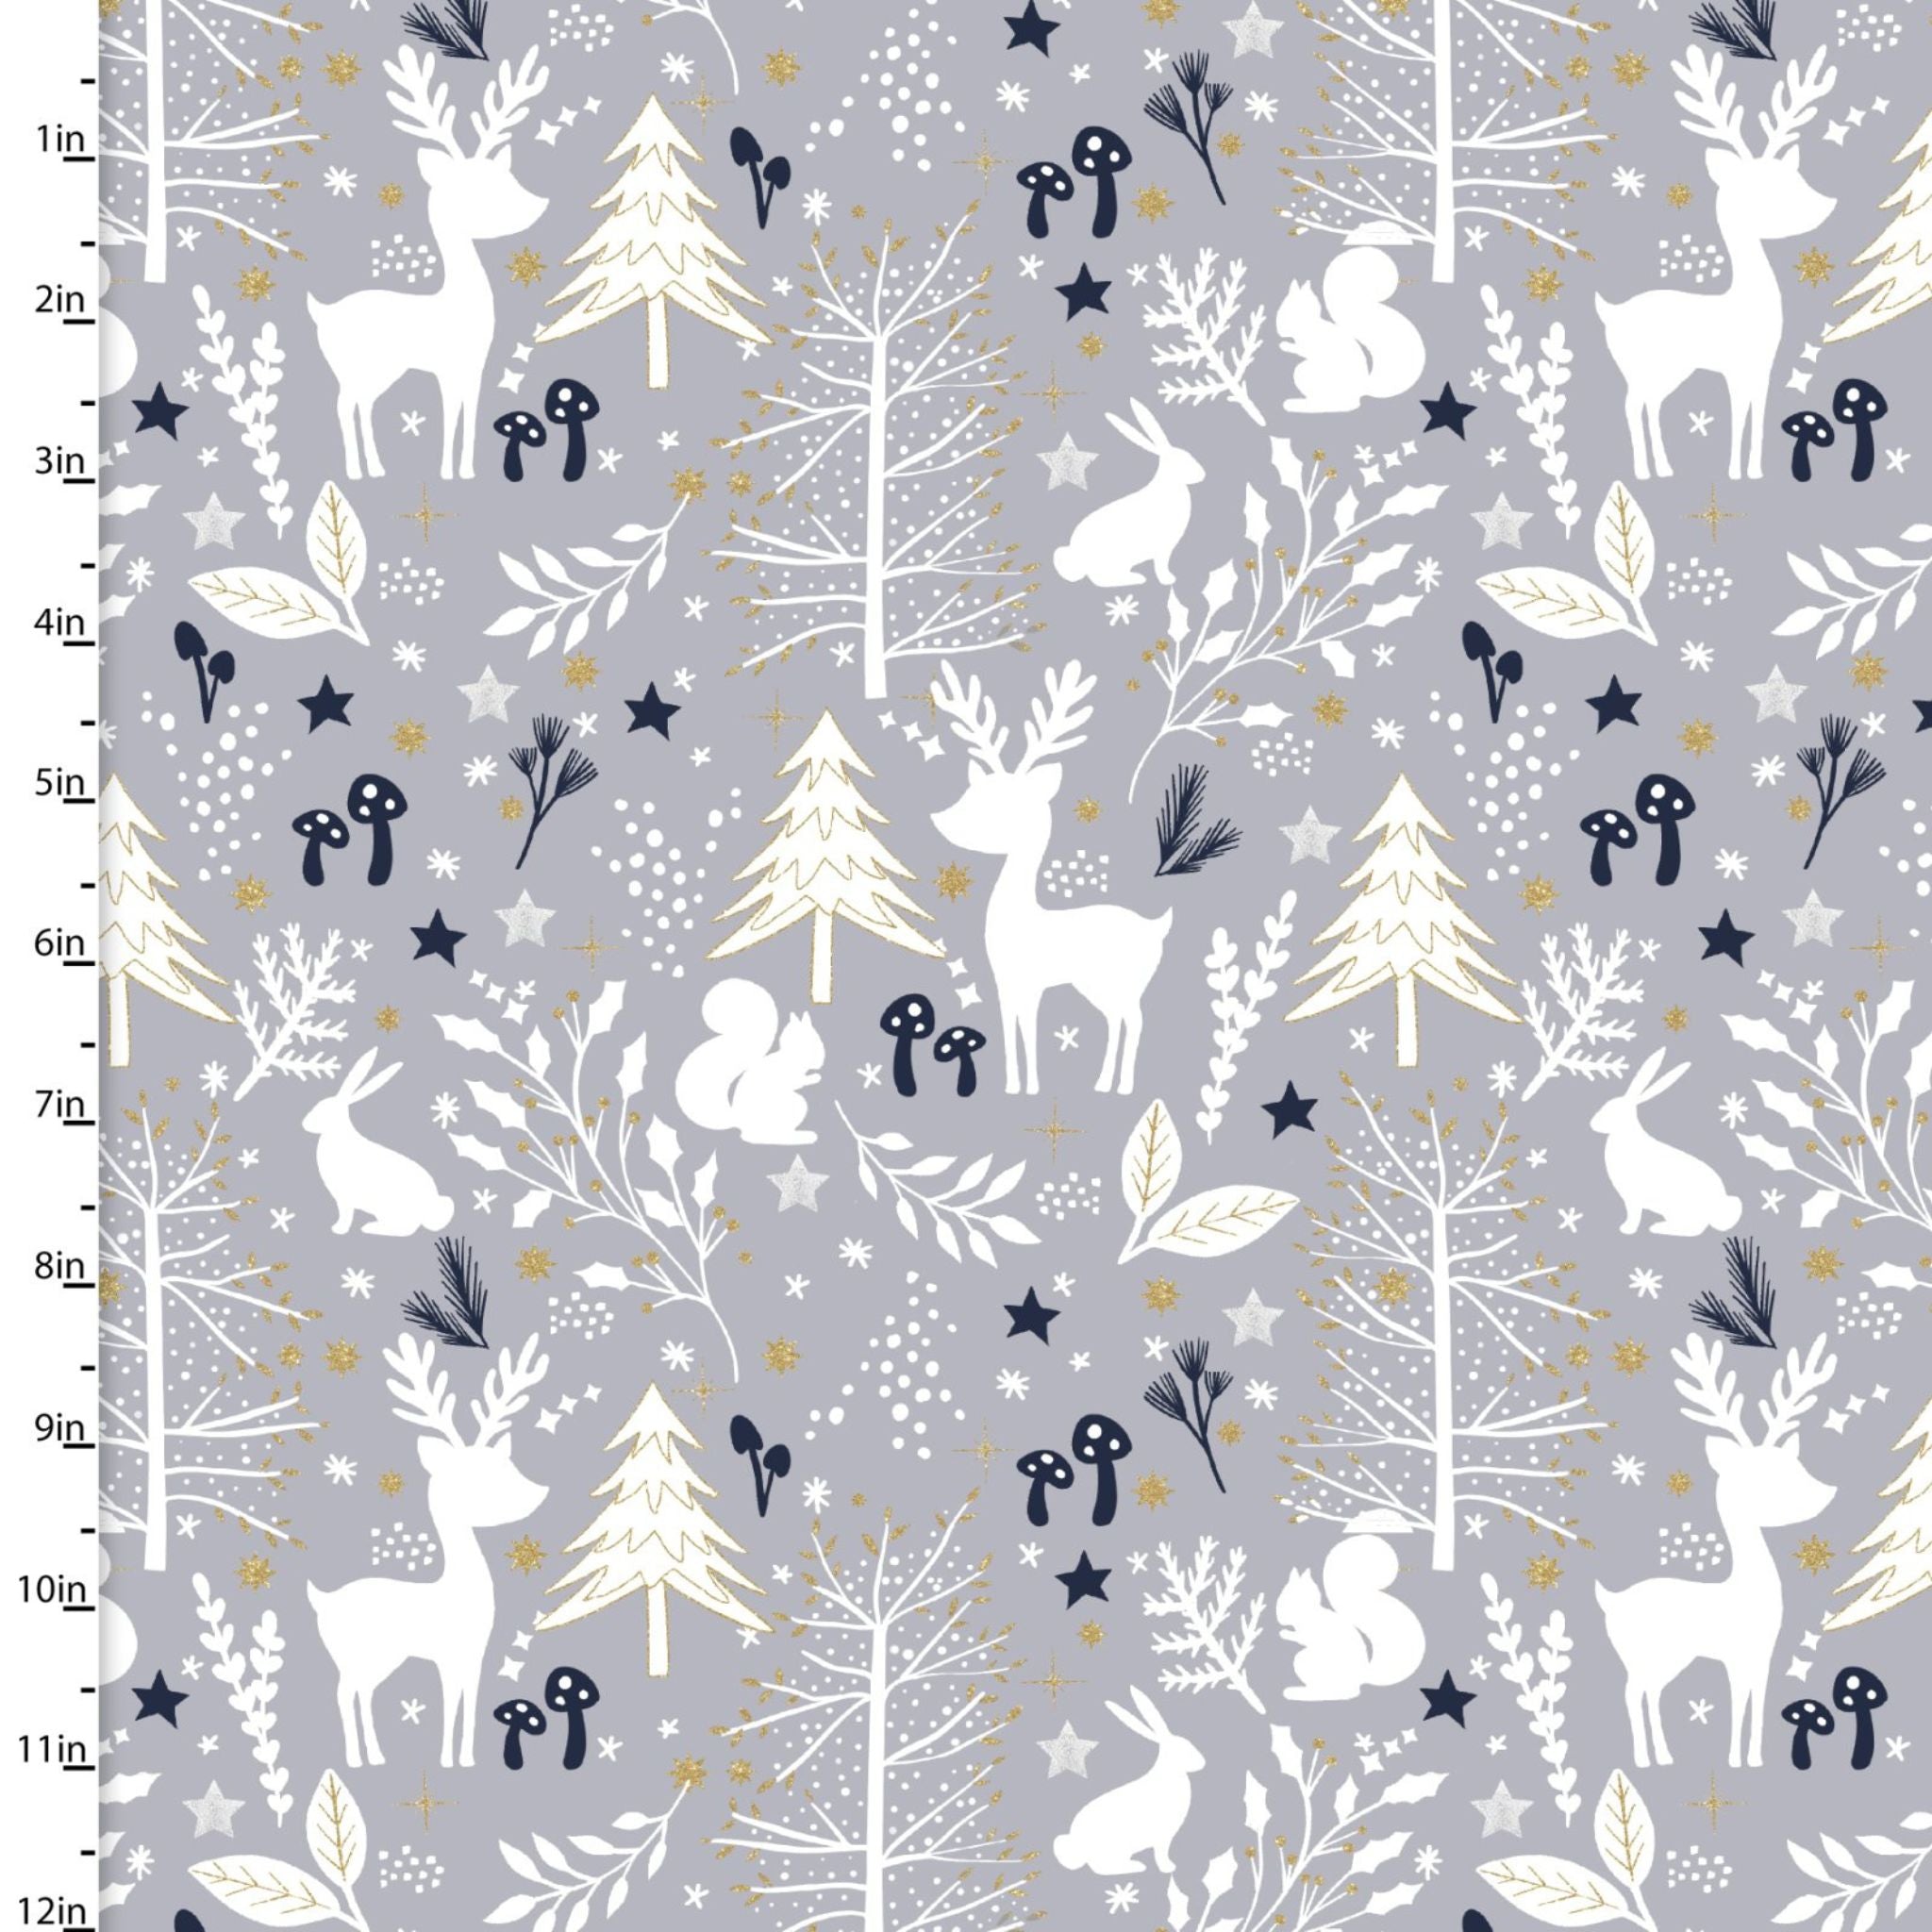 White reindeer, fir trees, hares and squirrels on a grey cotton fabric with gold accents - Majestic Winter by 3 Wishes